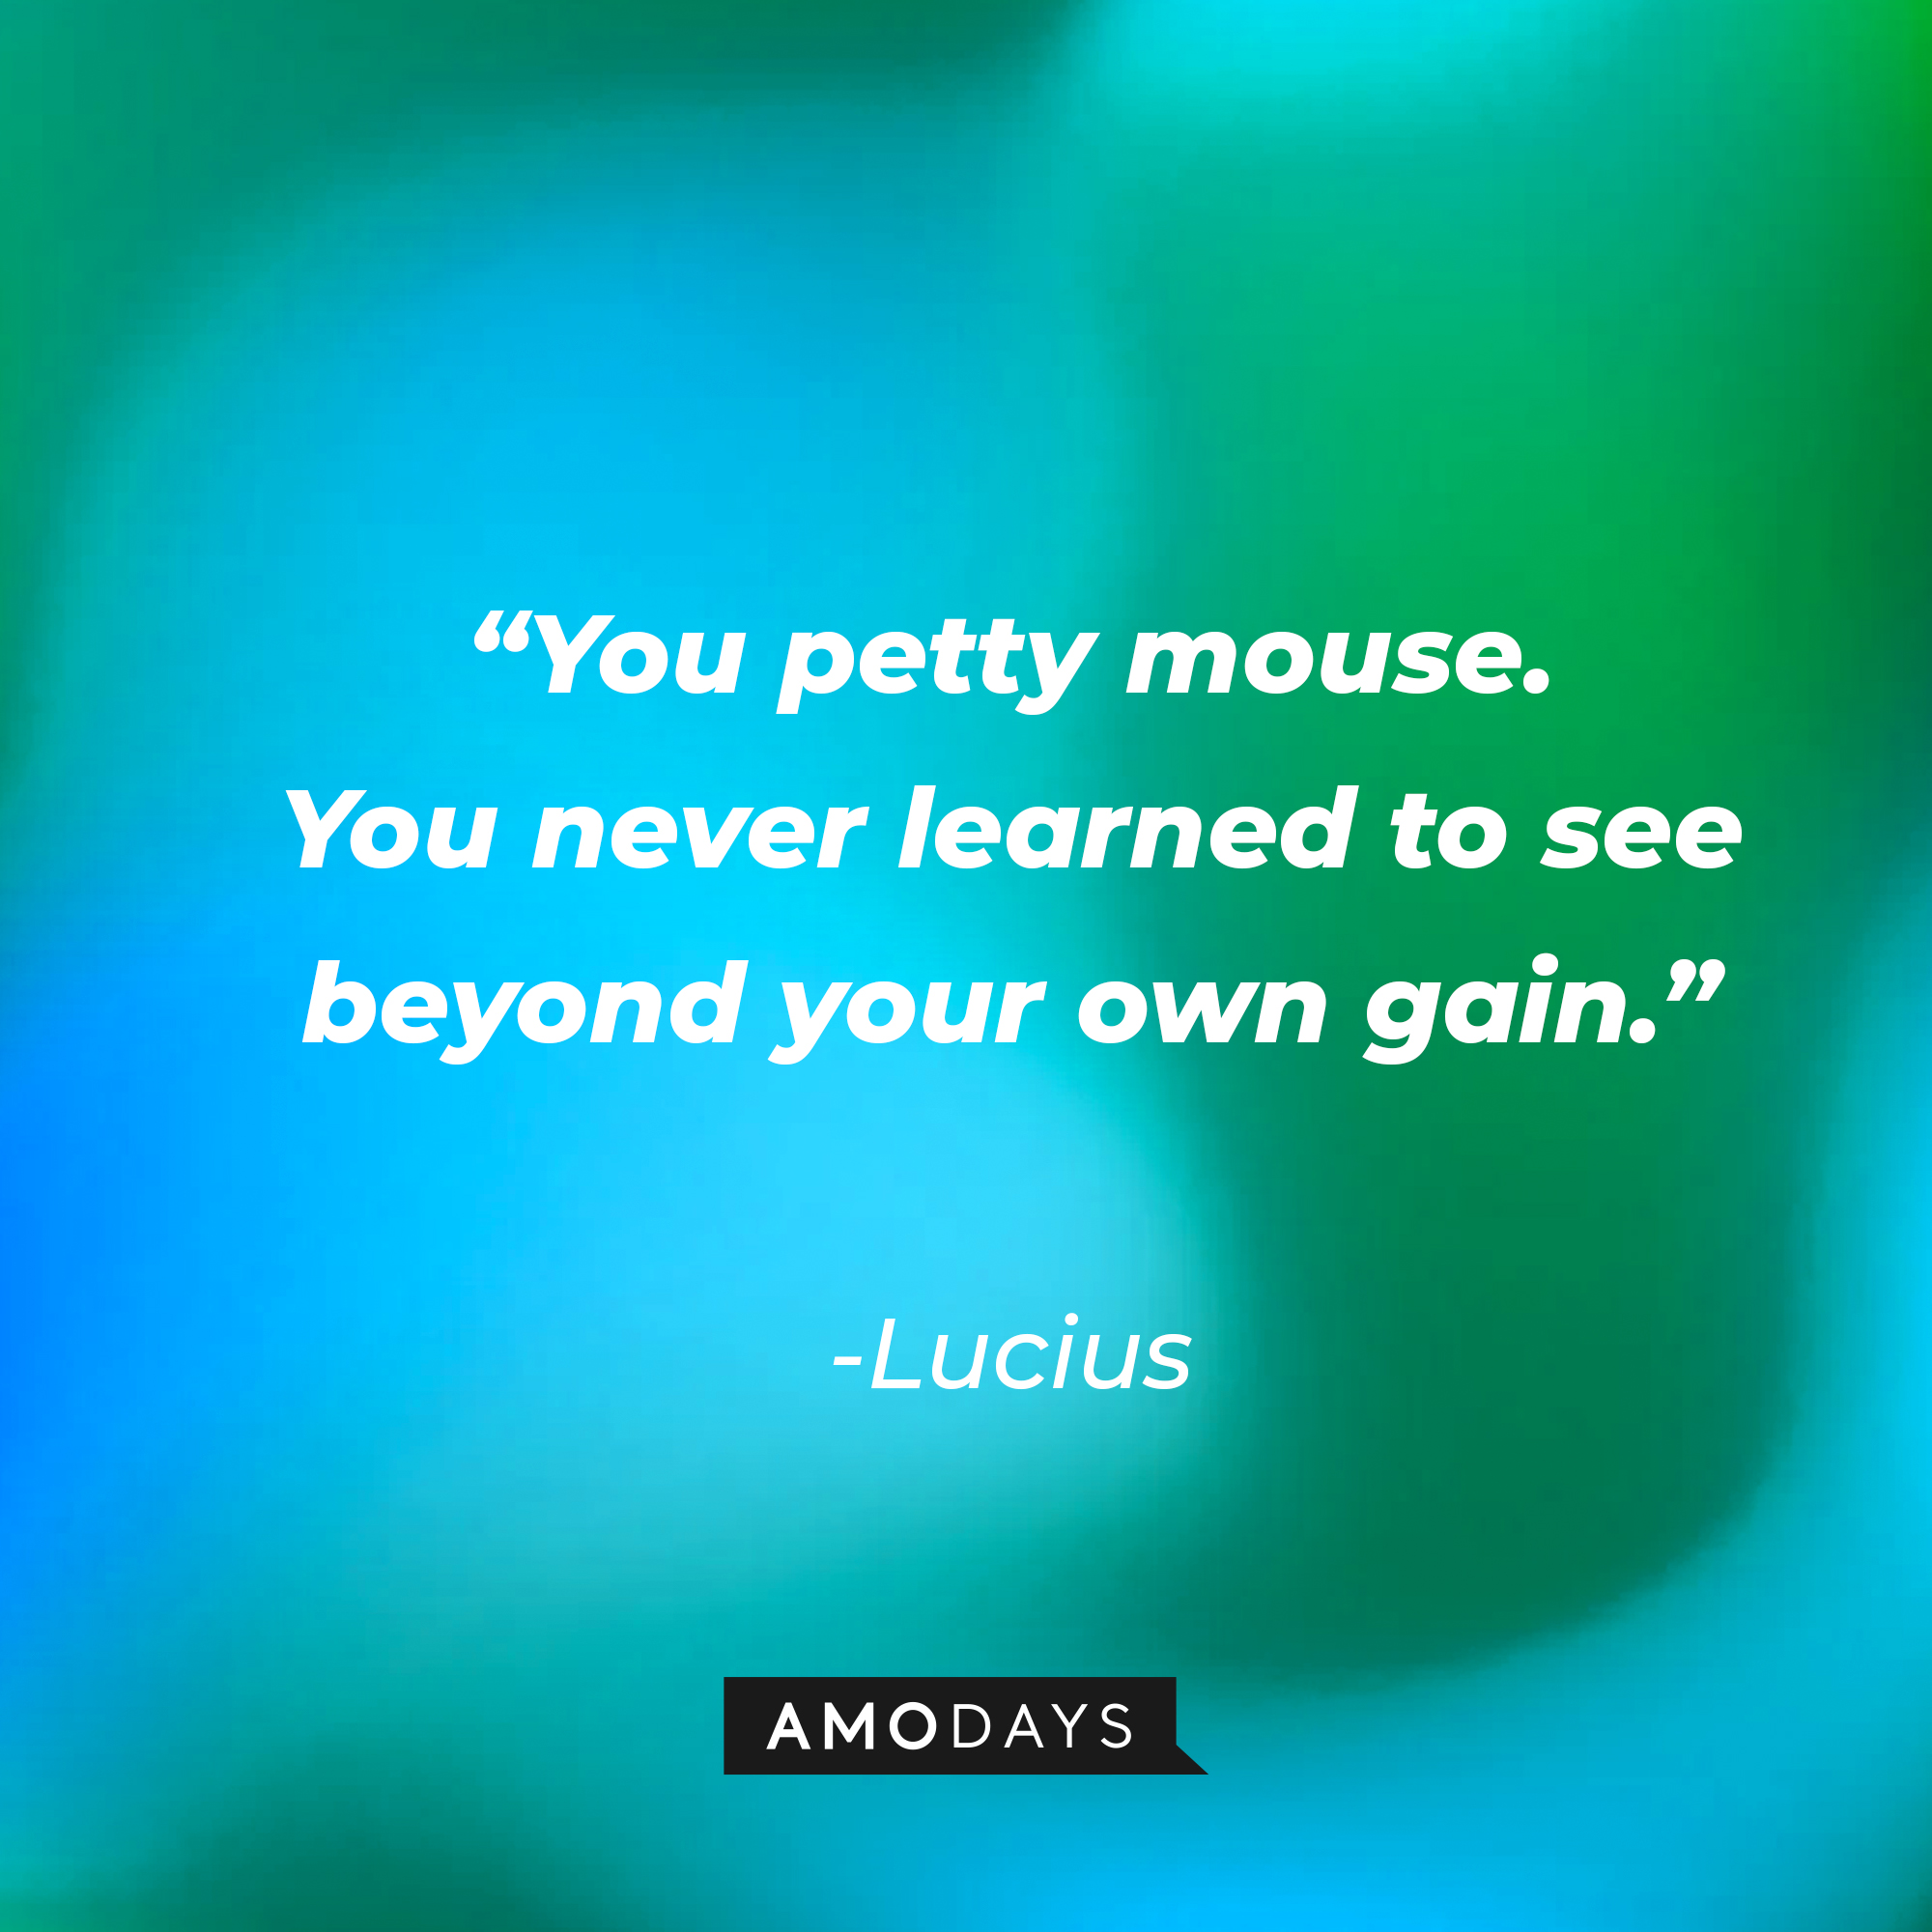 Lucius’ quote: “You petty mouse. You never learned to see beyond your own gain.” | Source: Amodays